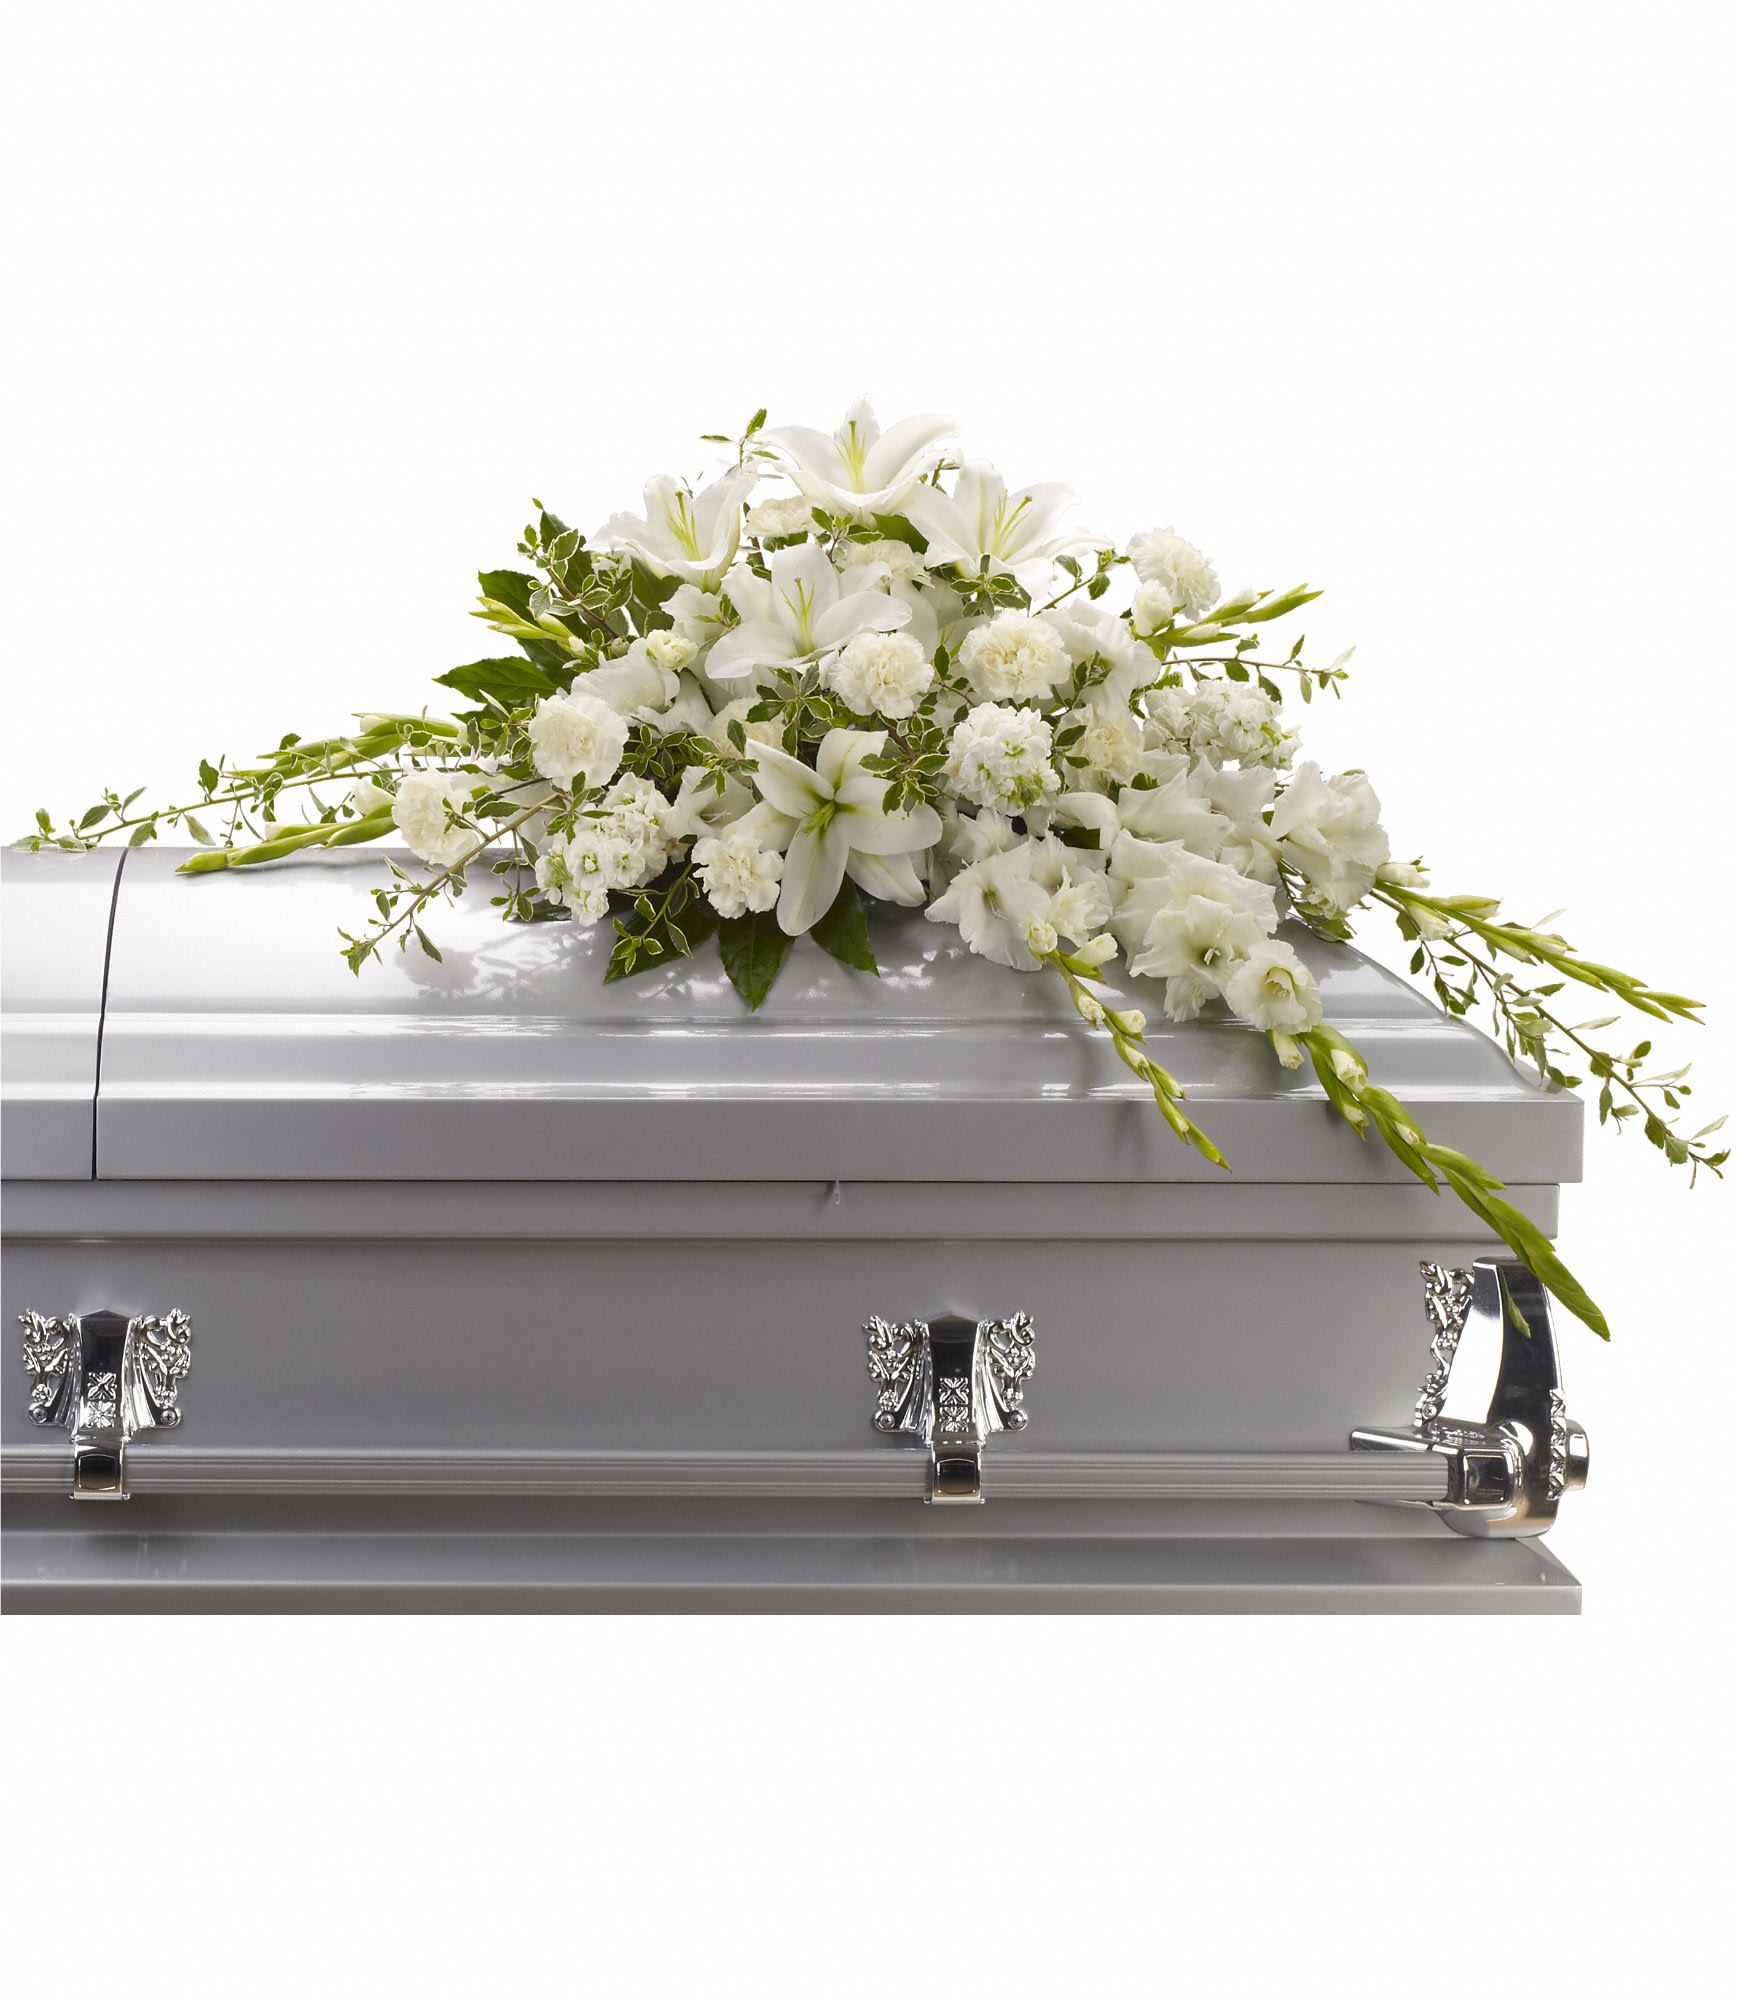 Bountiful Memories Casket Spray by Teleflora - A casket spray made of all white flowers and simple greenery is a simply stunning way to honor the deceased while bringing a quiet strength and serenity to those present. 